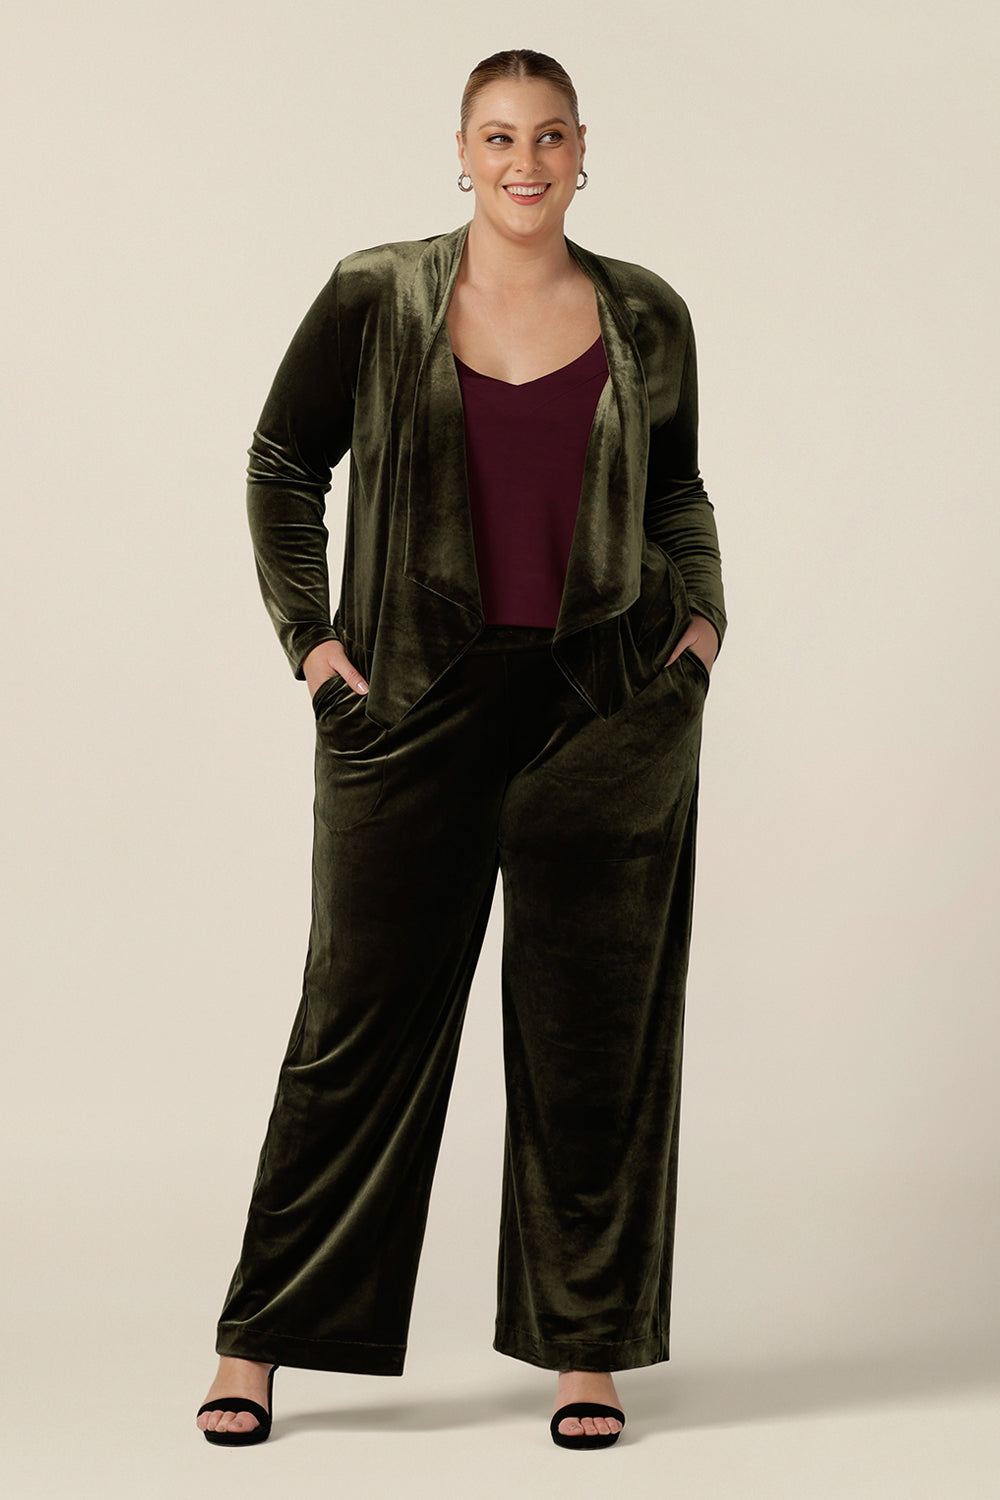 A size 18, plus size woman wears a waterfall front velour jacket for curve evening and cocktail wear. In bracken green this cocktail jacket is worn with wide leg velour trousers as a cocktail pant suit. Good for evening and wedding guest outfits, shop made-in-Australian occasionwear in petite to plus sizes at Leina & Fleur.